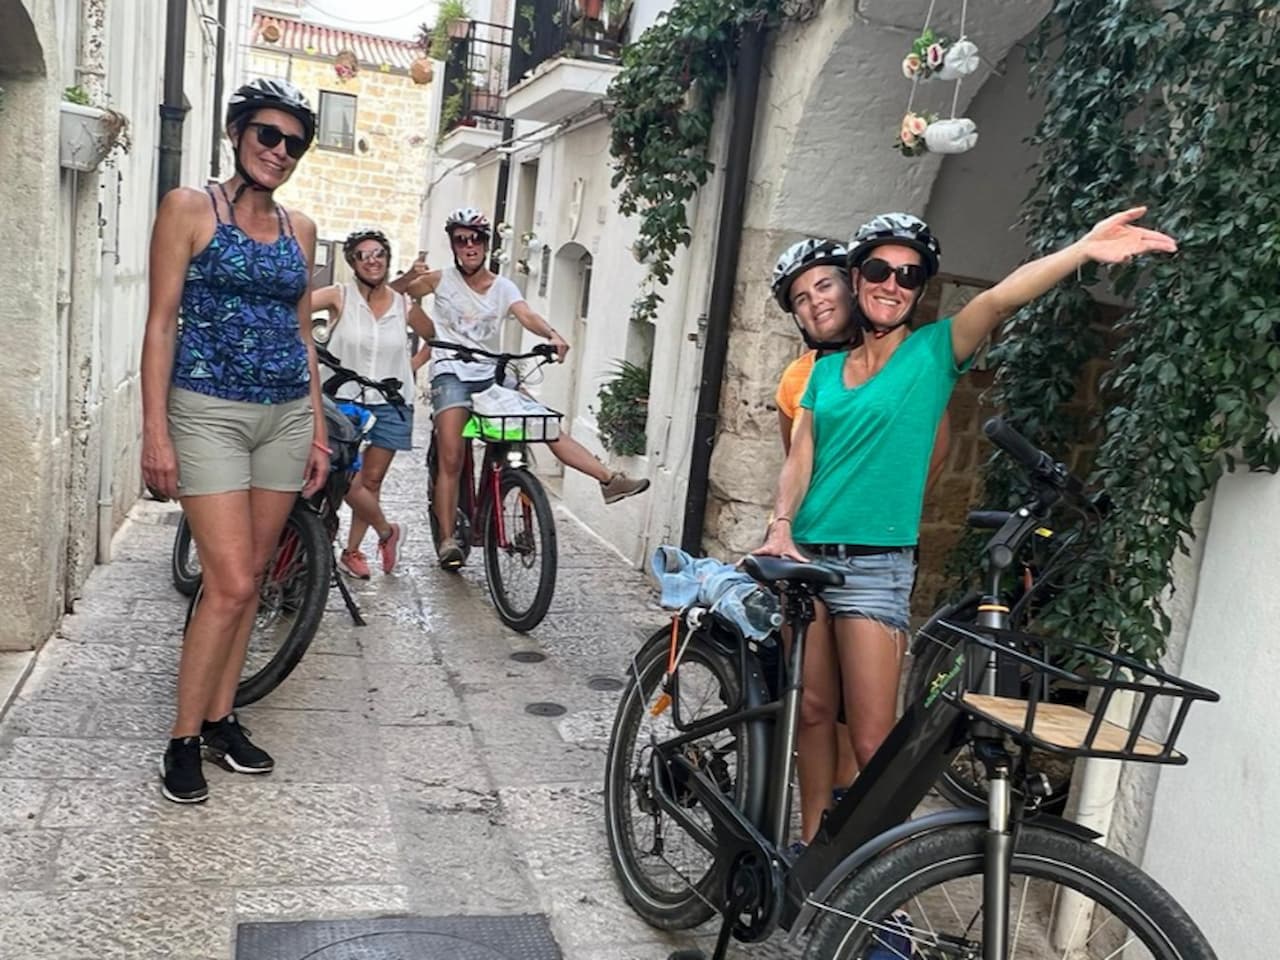 Rent an ebike and embark on an unforgettable cycling tourism journey, blending sustainability with the allure of these enchanting regions. Explore the beauty of Puglia and Basilicata with Ebike Rental Puglia.